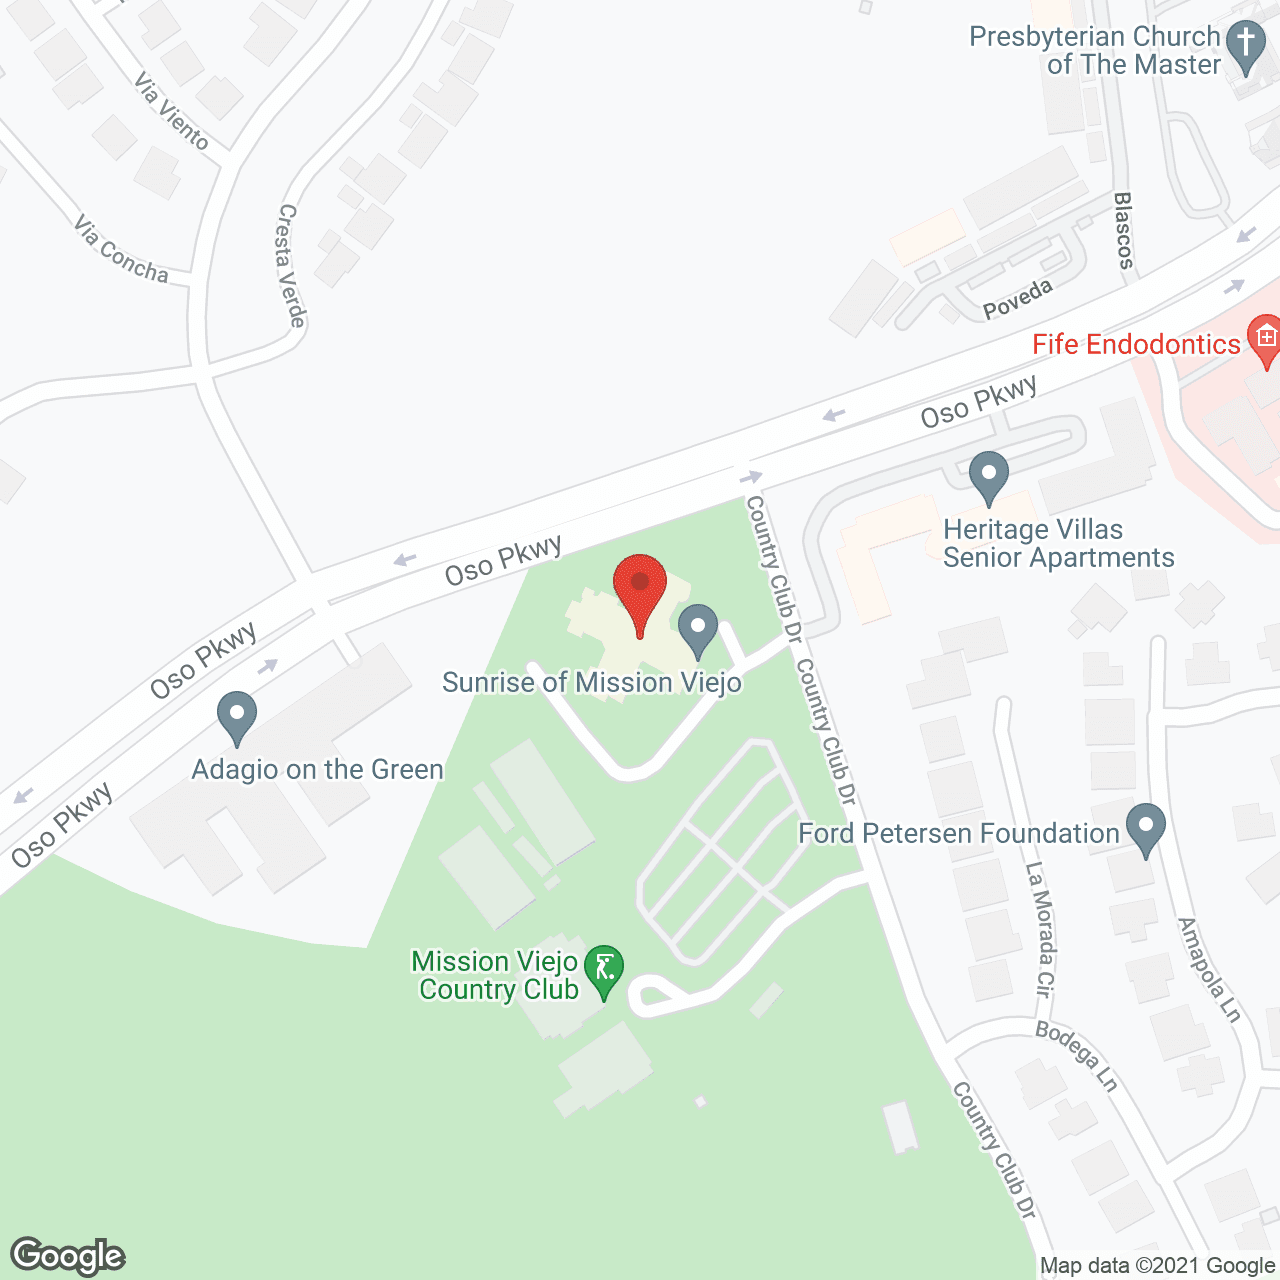 Sunrise of Mission Viejo in google map